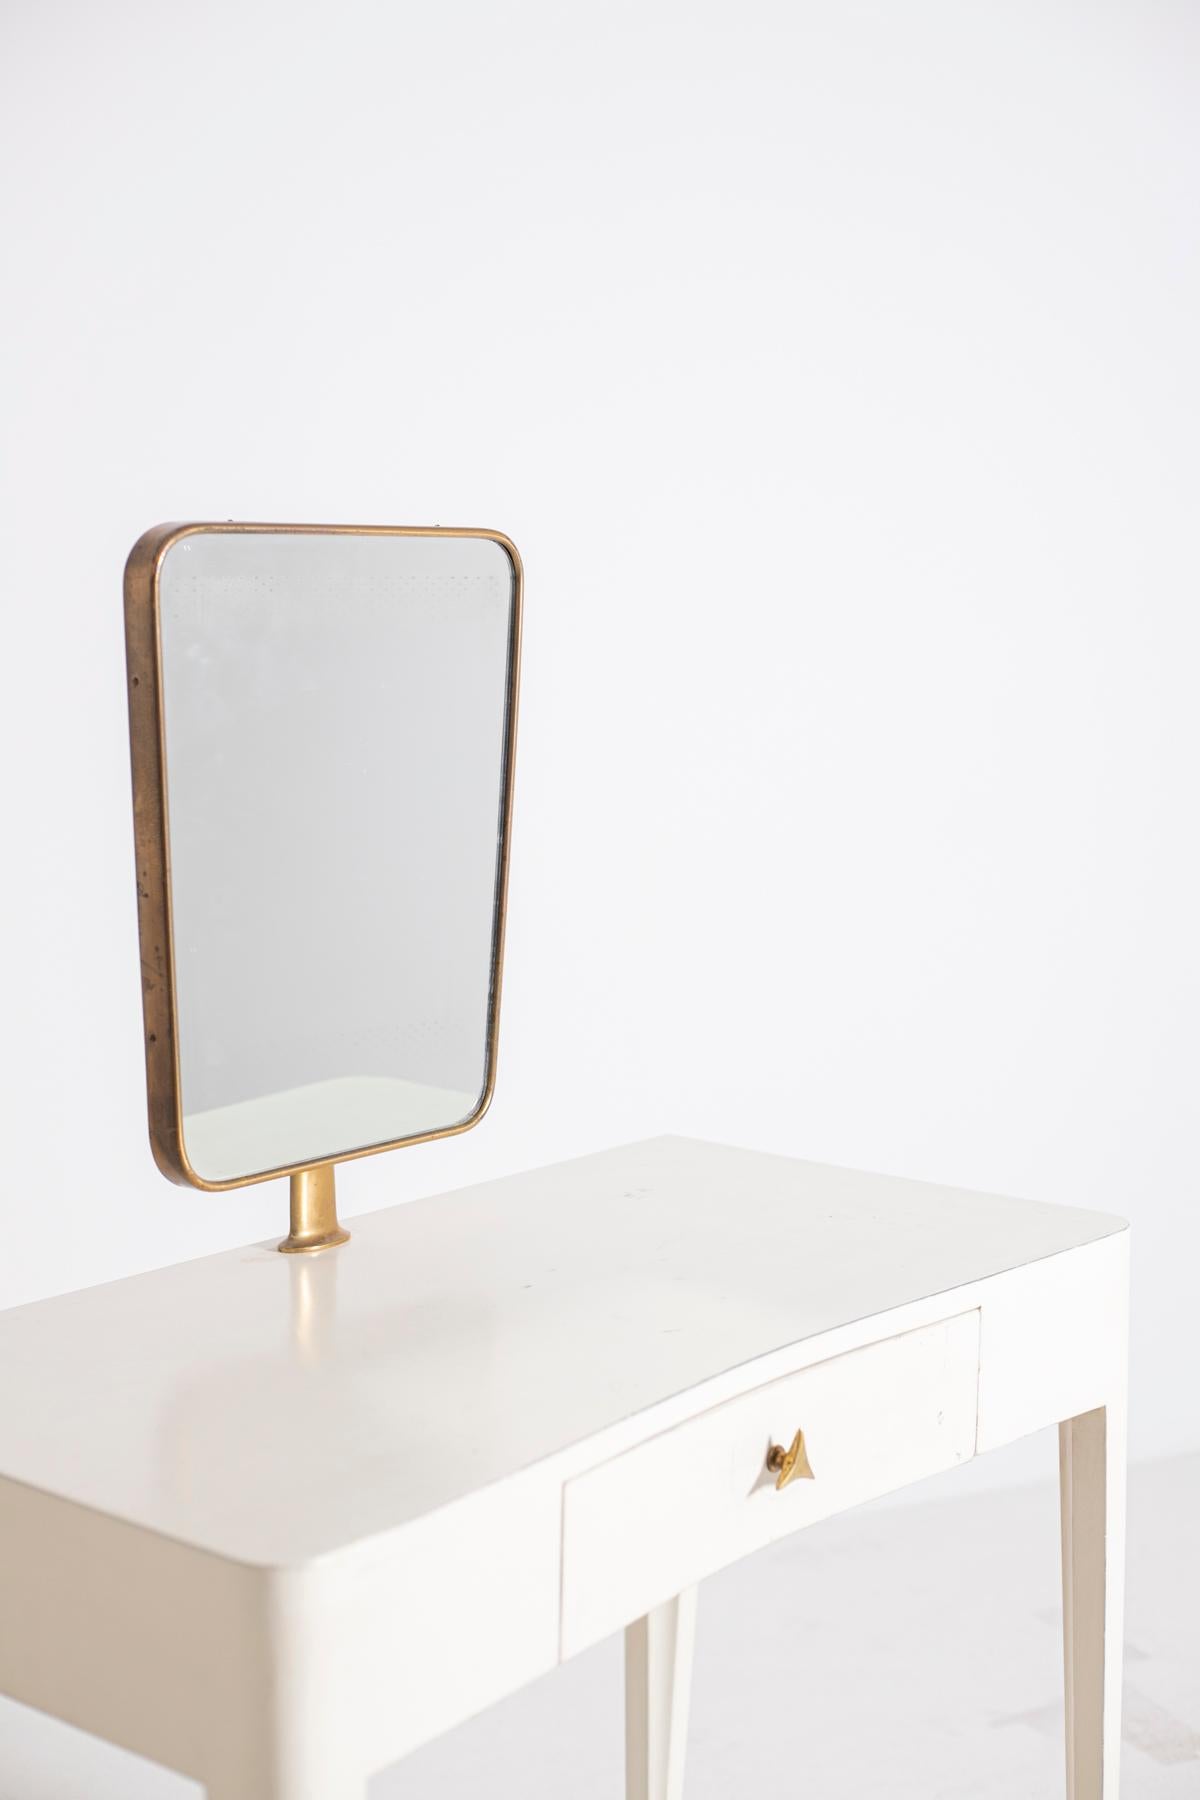 Mid-20th Century Italian Vanity Mirror White in Brass and Wood Attributed to Gio Ponti, 1950s